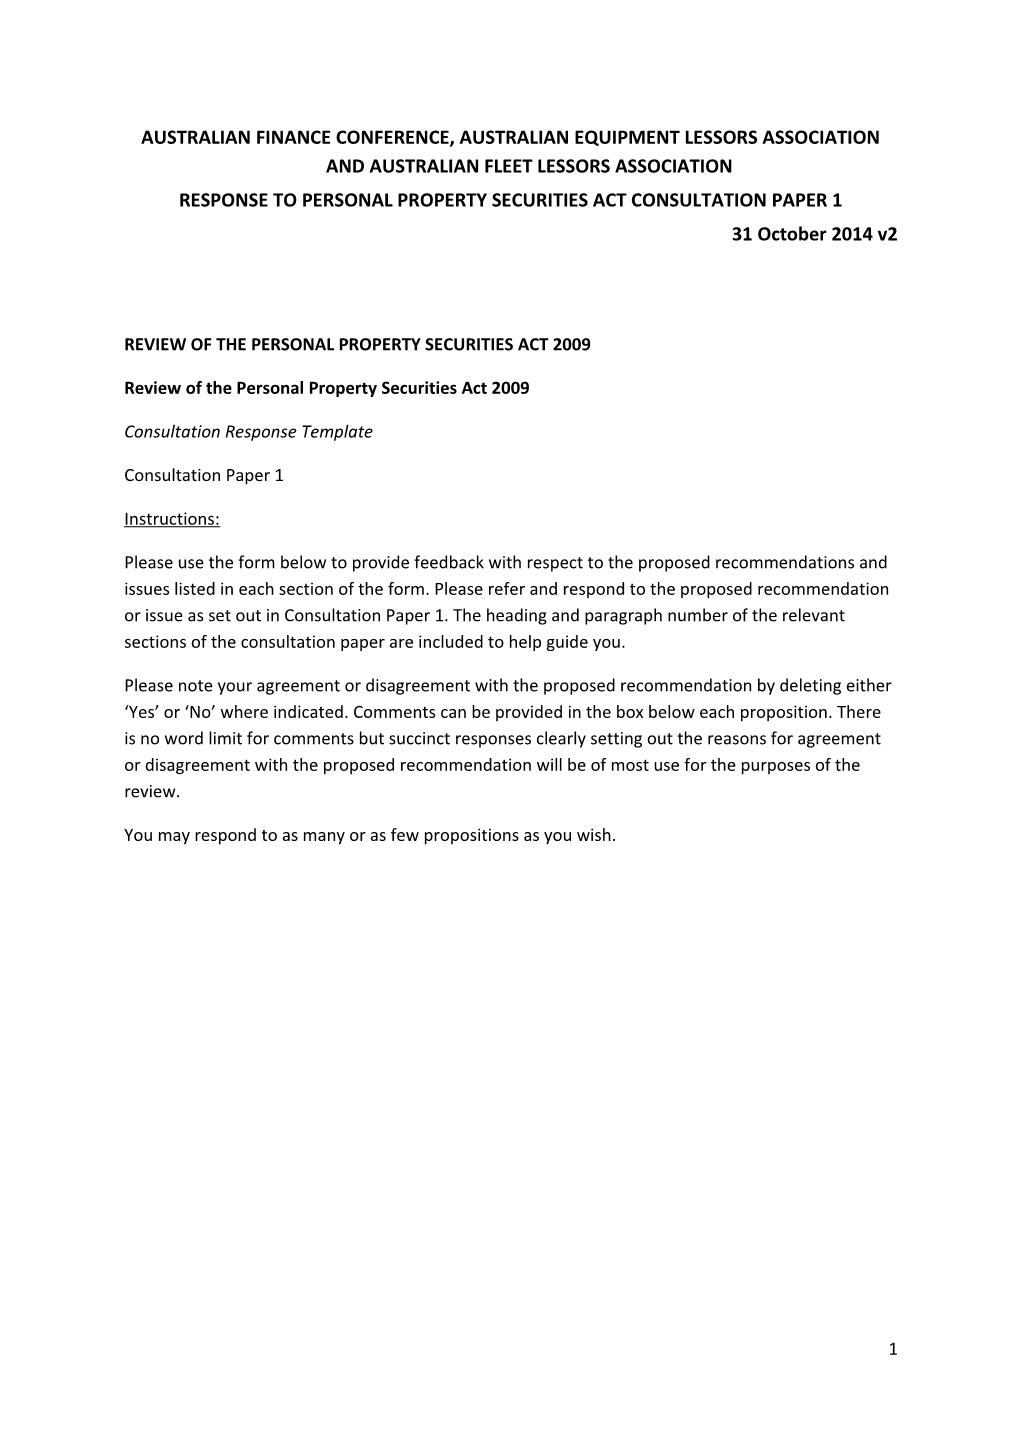 PPS Review Consultation - Paper 1 - Ron Hardaker - AFC - CP#1 Response